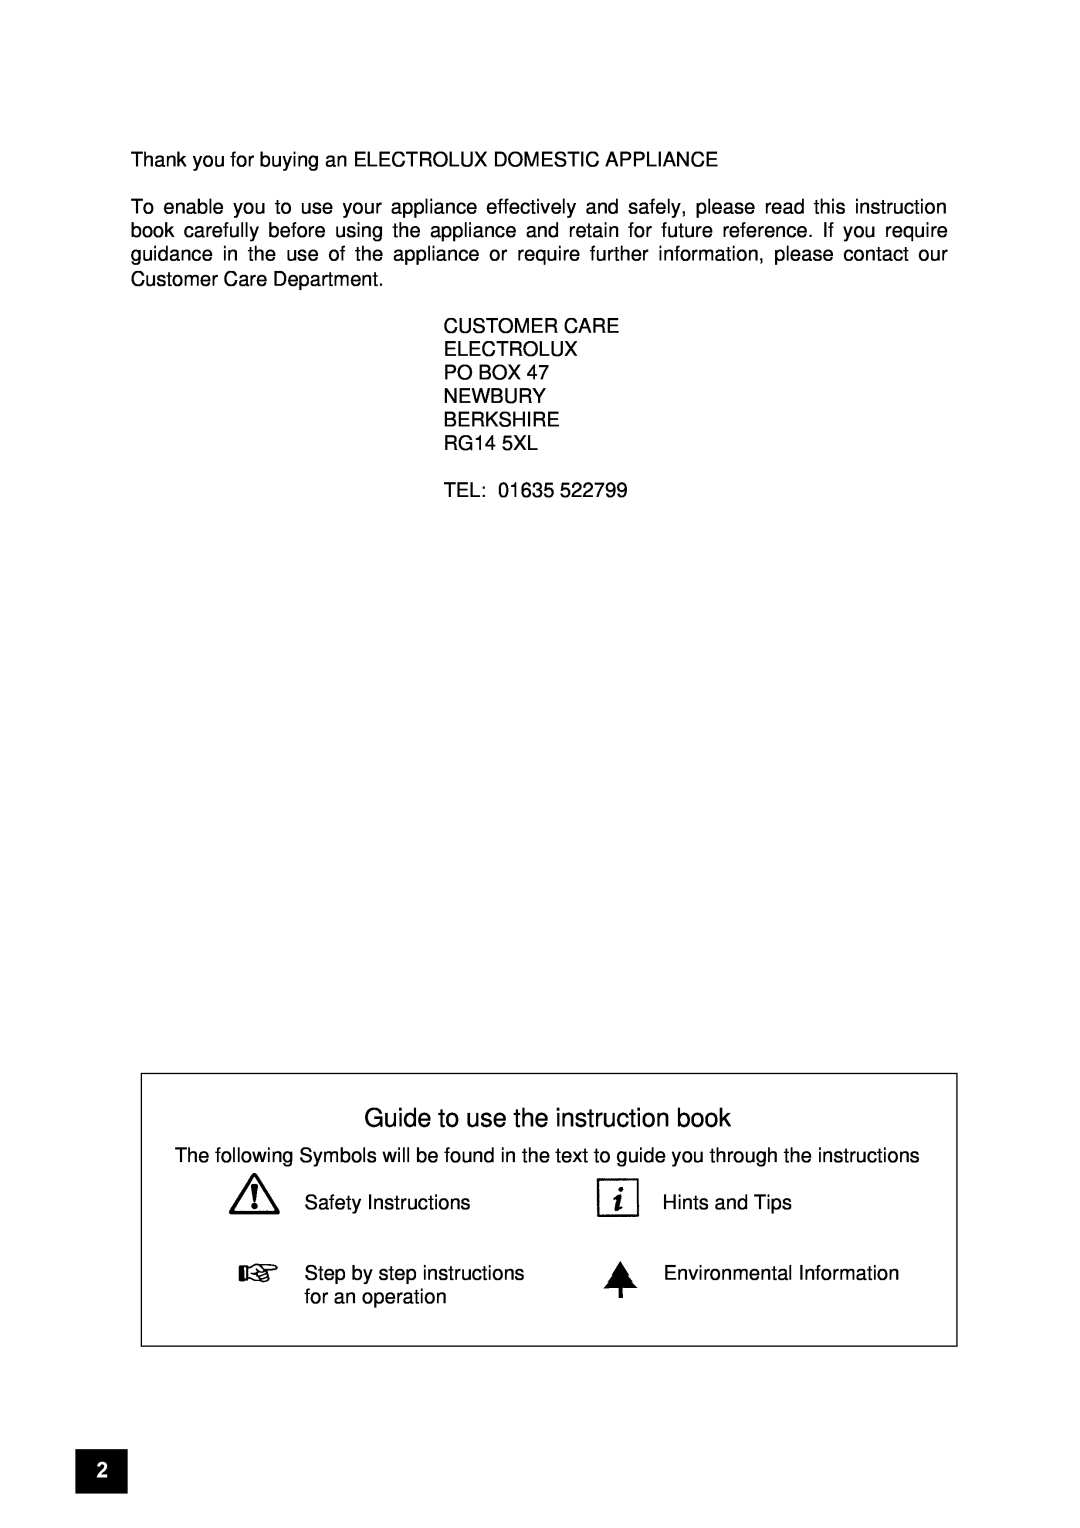 Electrolux ER 7656B, ER 7657B instruction manual Guide to use the instruction book 